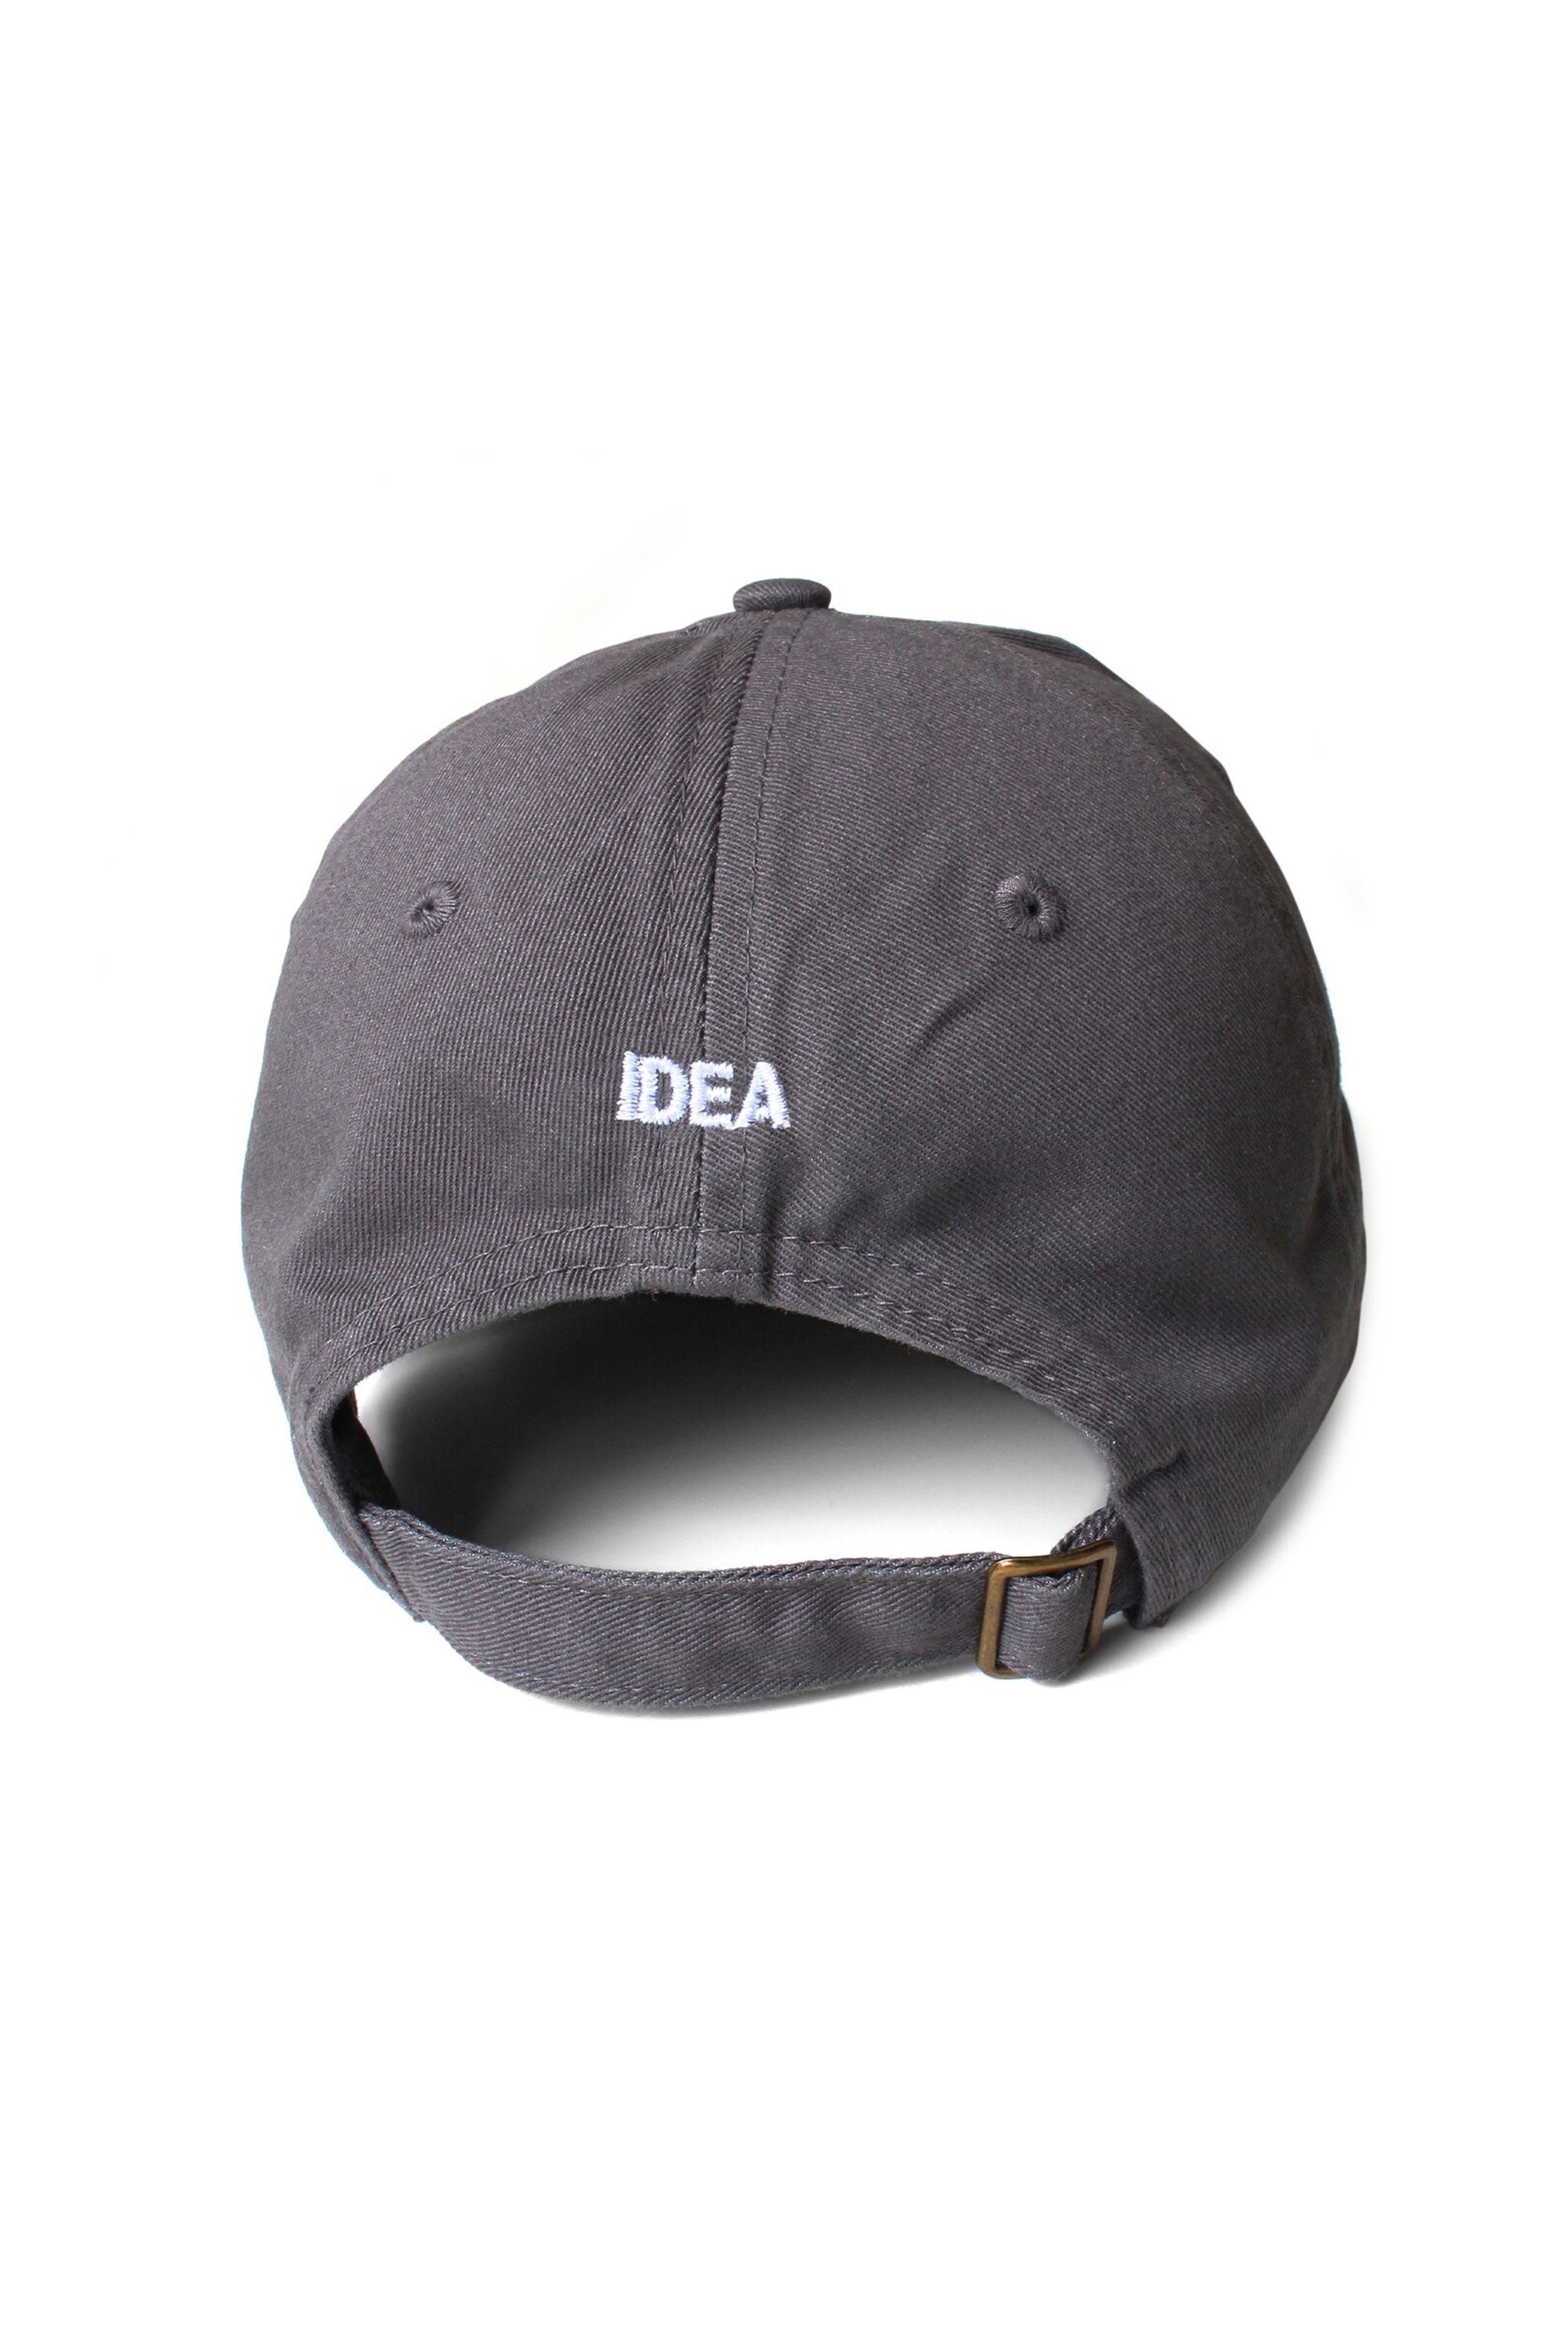 The IDEA - TECHNO IS MY BOY FRIEND HAT CHARCOAL  available online with global shipping, and in PAM Stores Melbourne and Sydney.